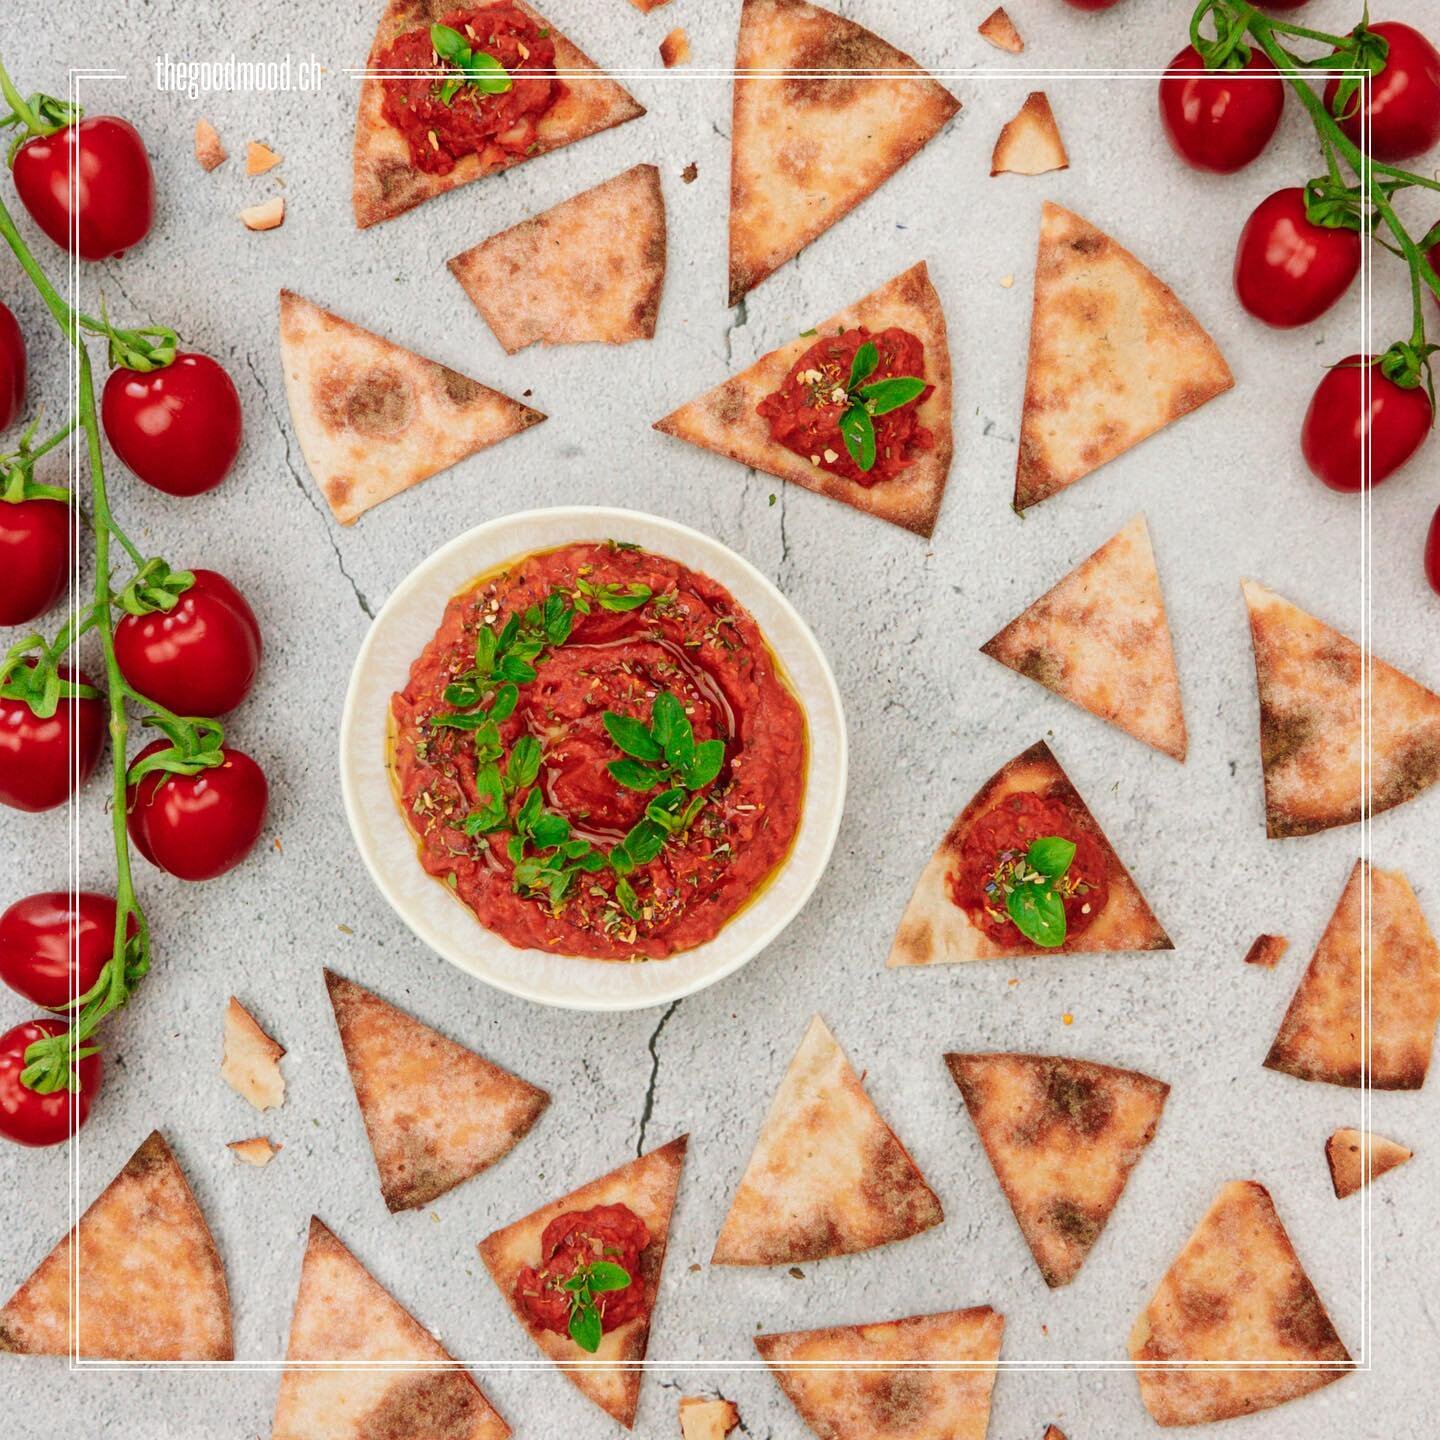 ♡ 
Bean-Tomato Spread 
&nbsp;
ℹ️Text in Deutsch &amp; Englisch
&nbsp;
If you like sundried tomatoes, you&rsquo;ll love this flavorful bean-based spread with lots of fiber and plant-based proteins.
&nbsp;

What you need for 4-5 portions:
↠ 350g white 